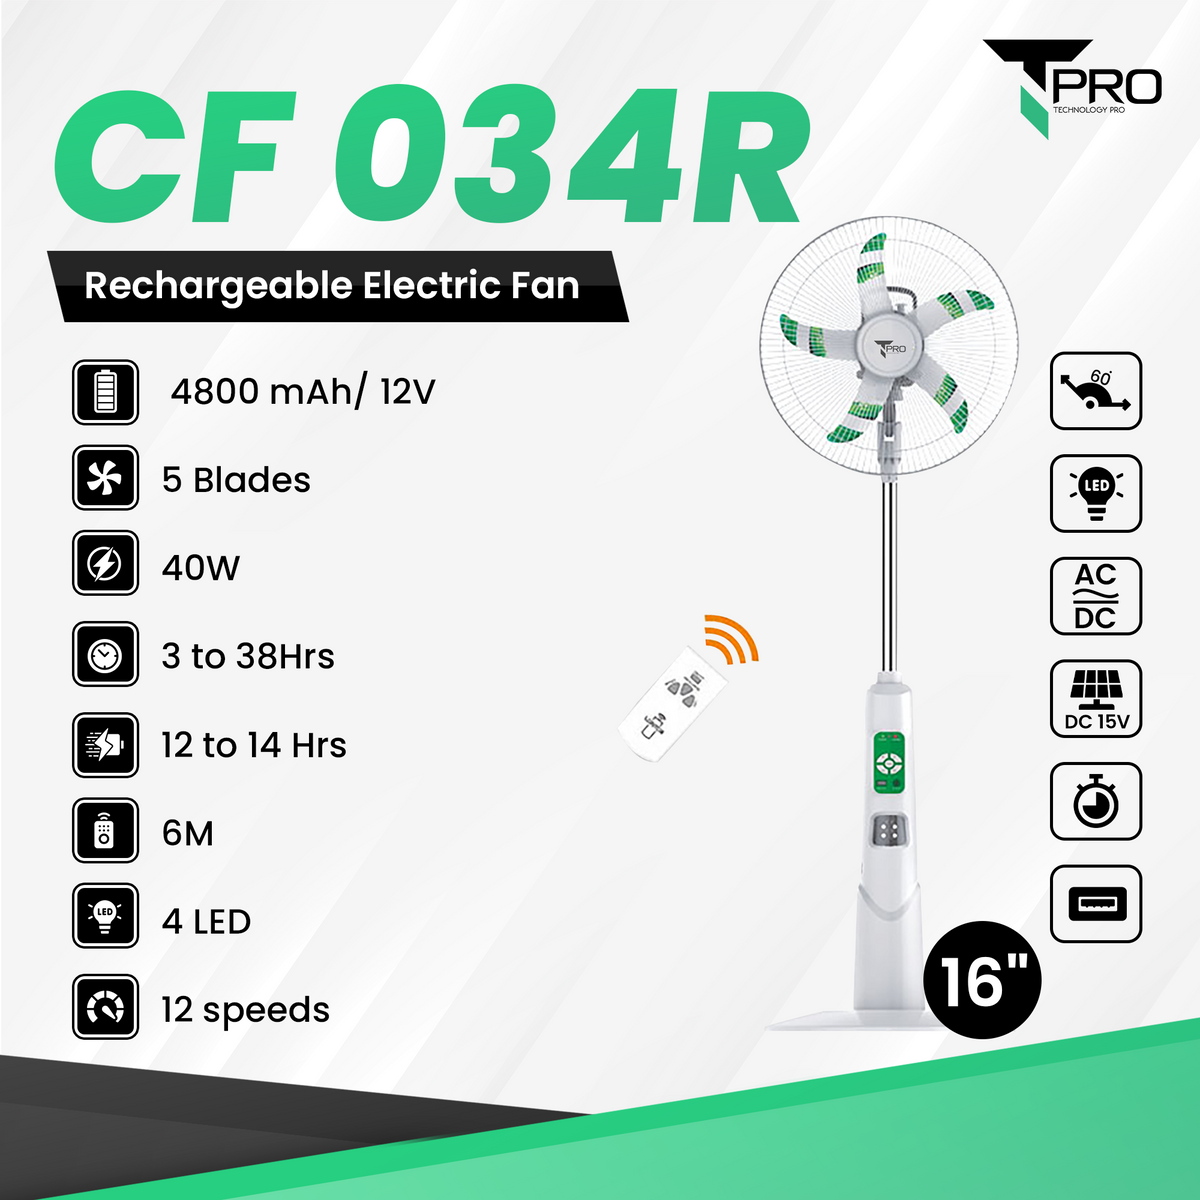 T PRO CTL-CF034R-16C 16" LONTOR RECHARGEABLE STANDING FAN WITH SOLAR CHARGE